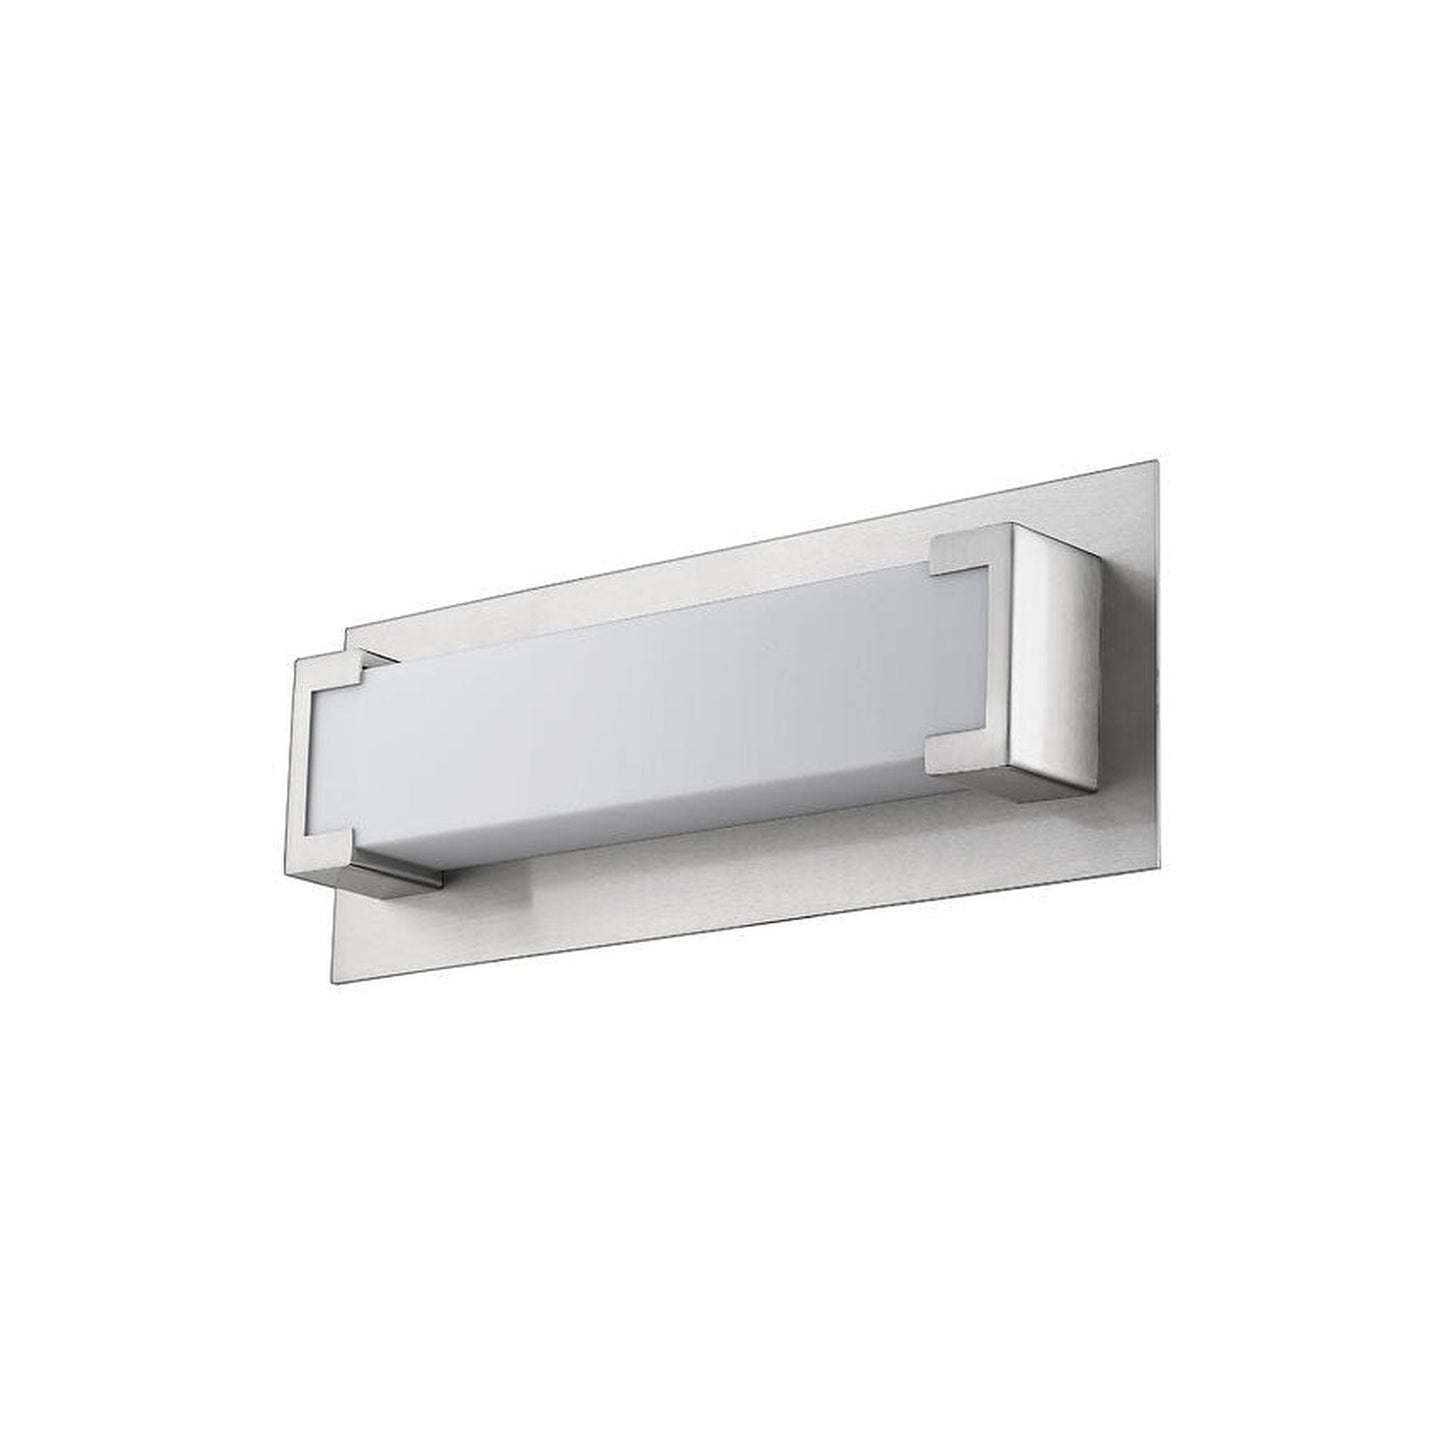 Z-Lite Elara 13" 1-Light LED Brushed Nickel Wall Sconce With Frosted Acrylic Shade